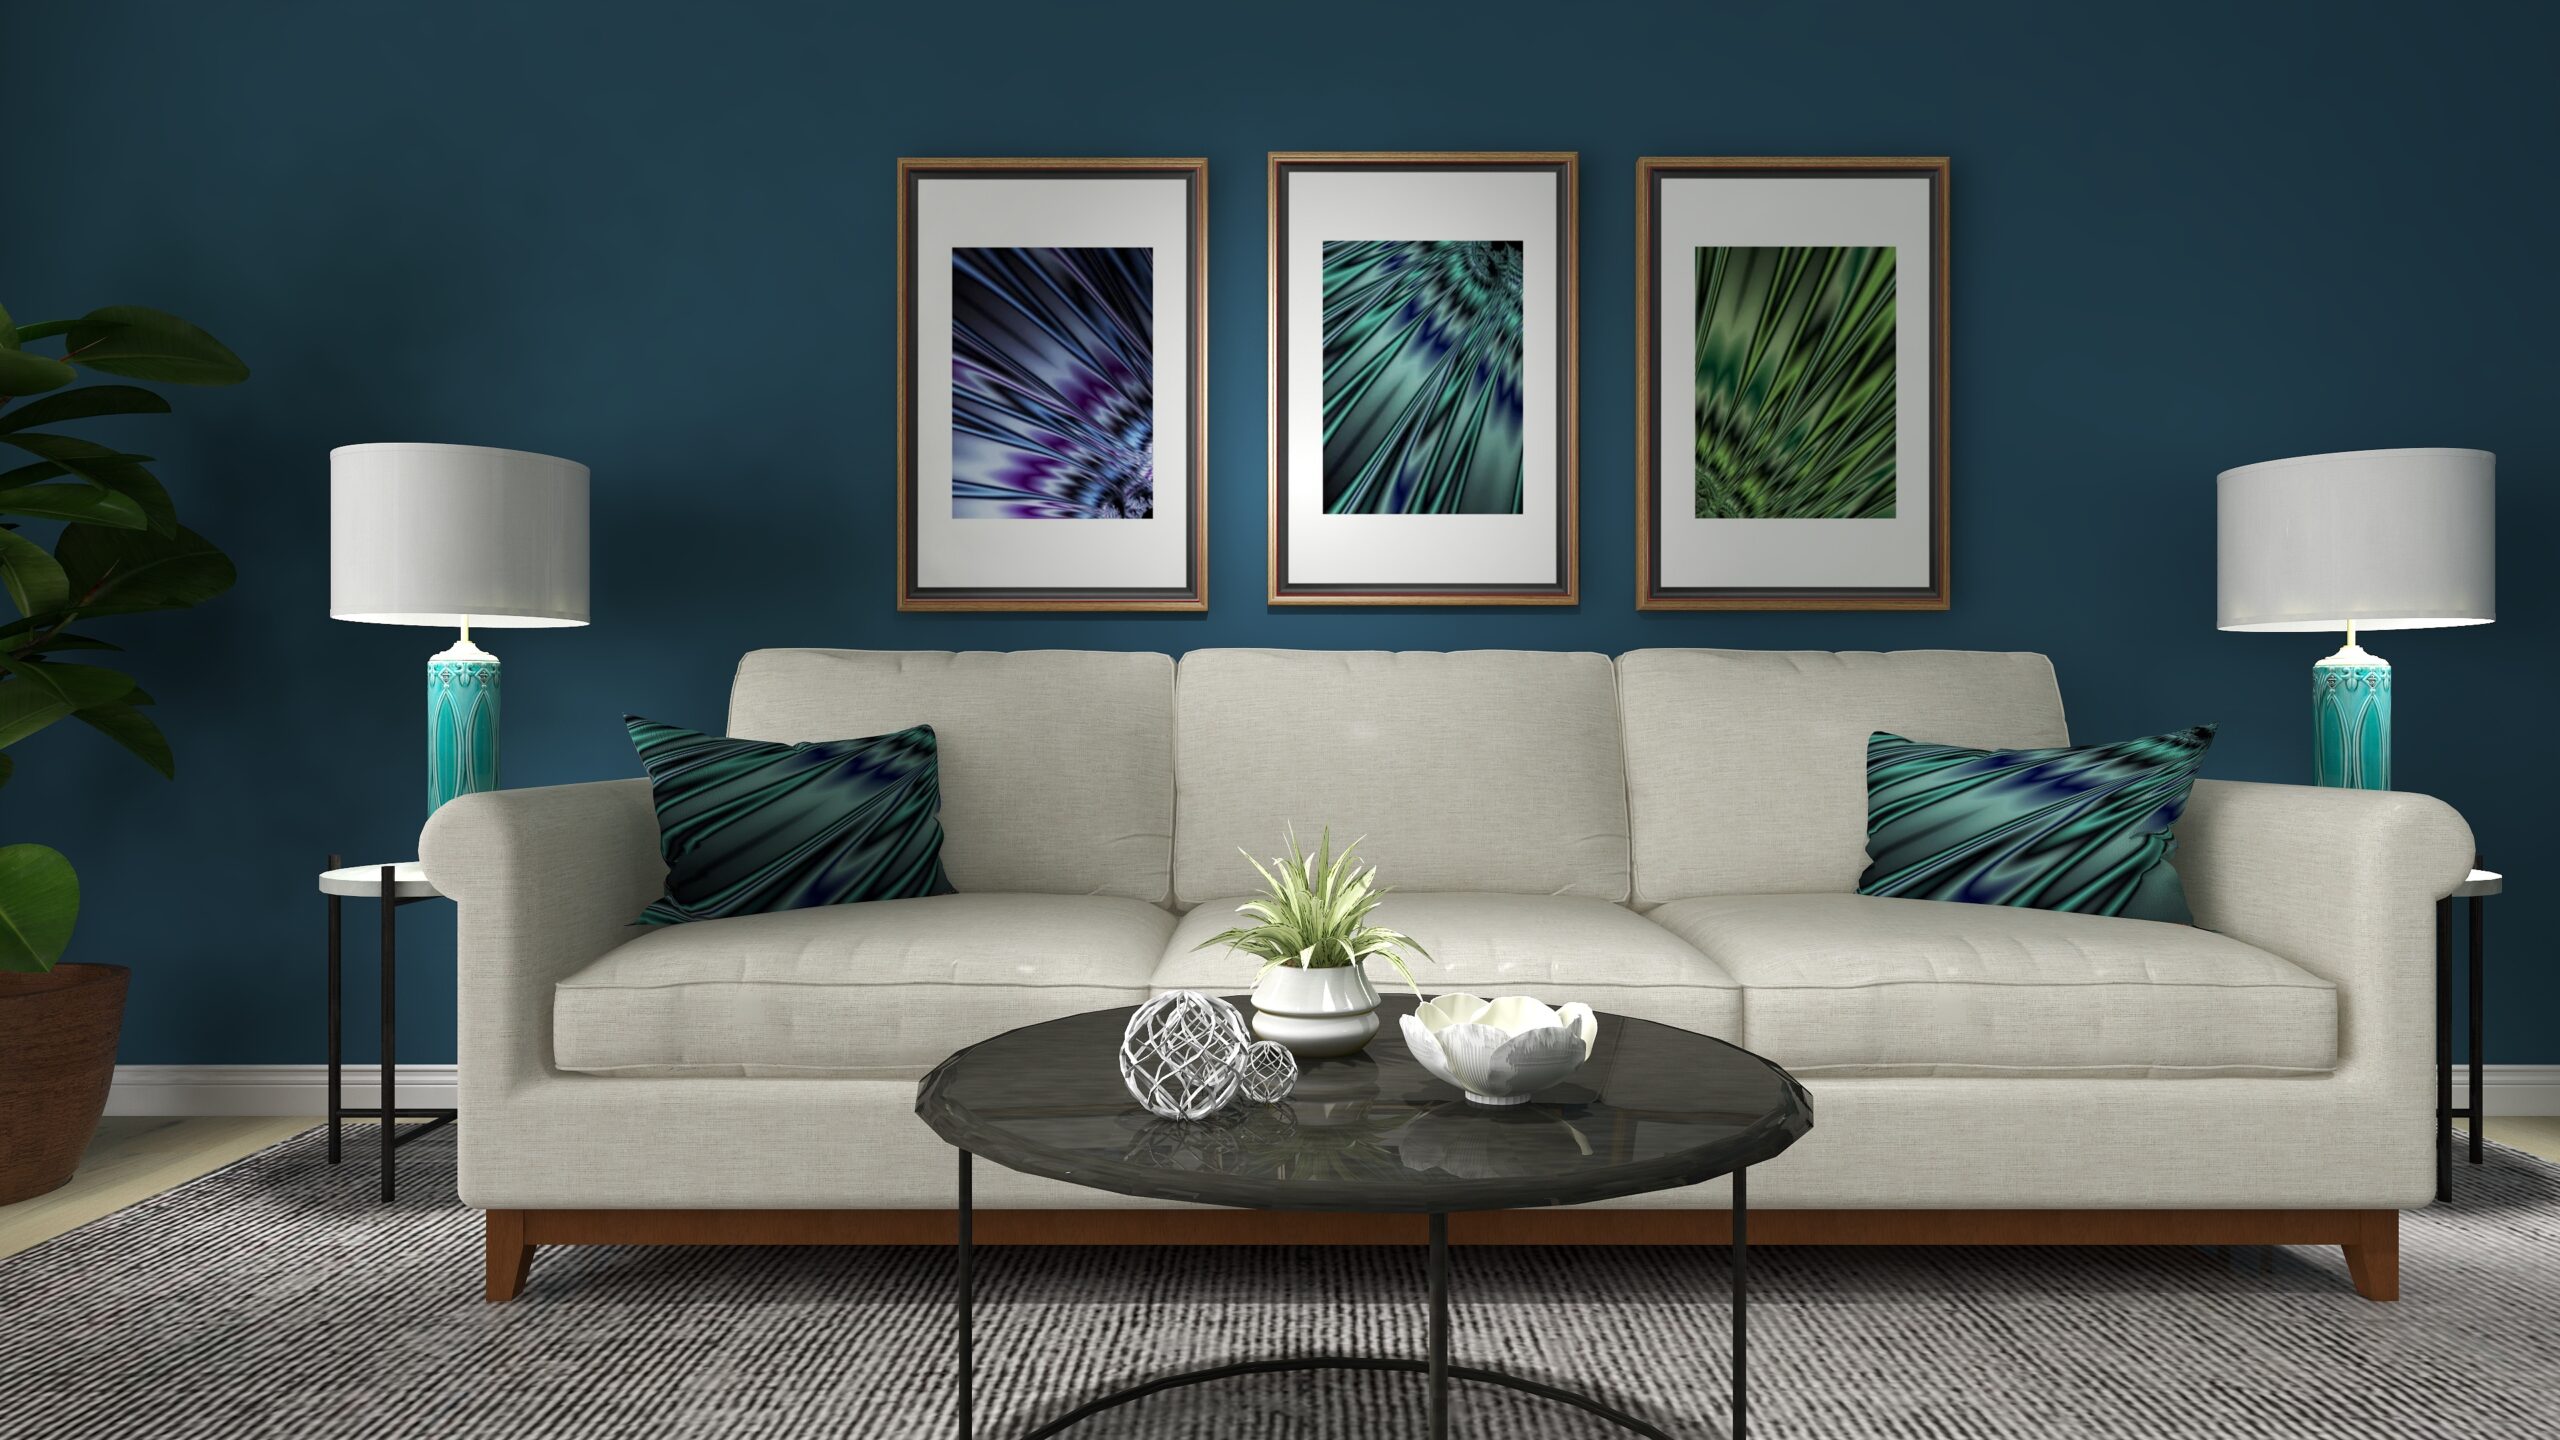 Saturday Night Live Art Shows- "Light Worker" Fractal Art by Mary Ann Benoit of Northern Lights Home Staging and Design